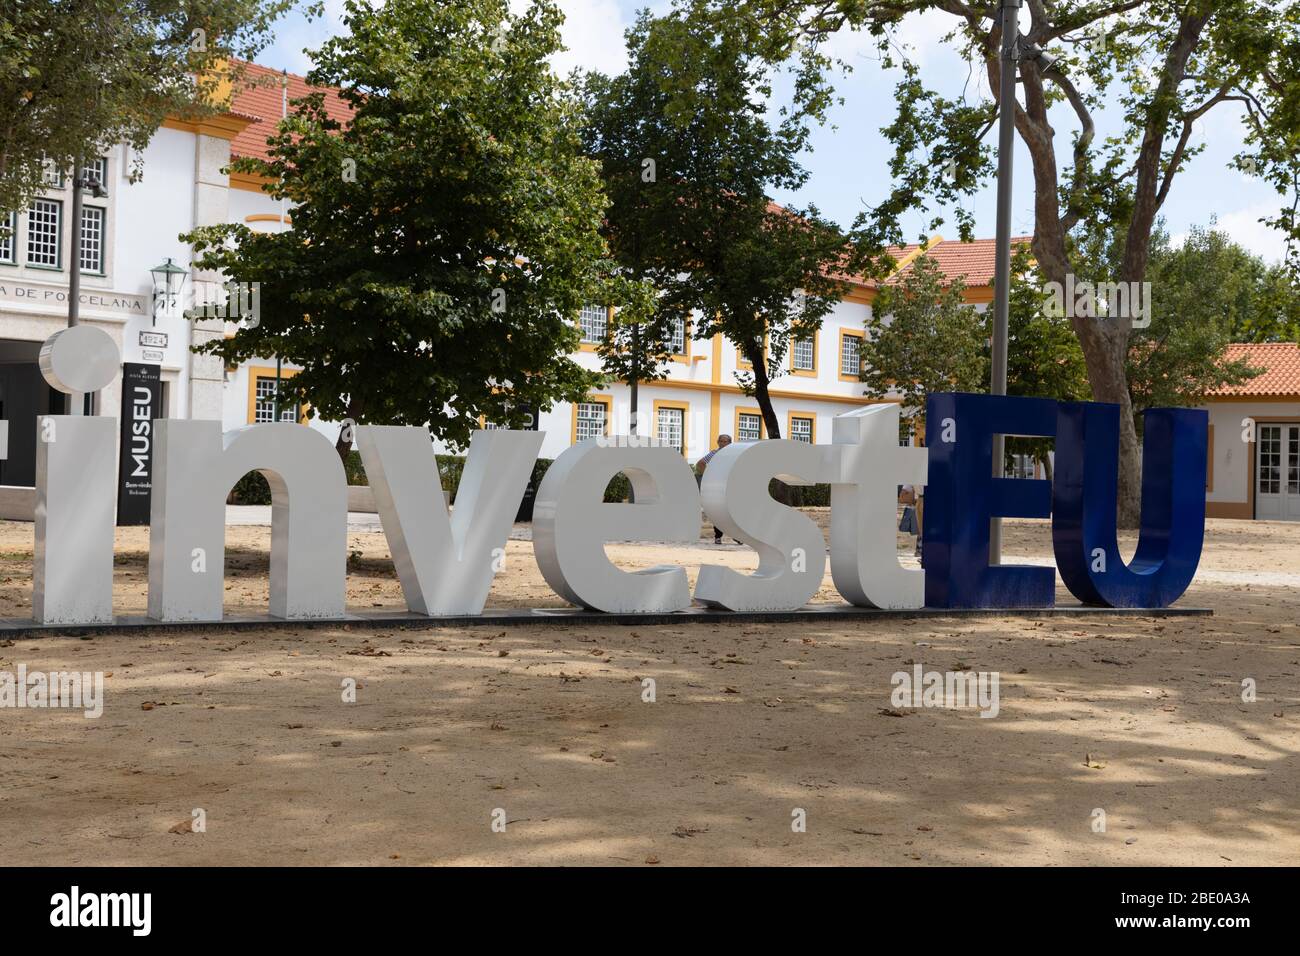 Large sign Invest EU outside the entrance of the Vista Alegre Museum  located in Ilhavo, Portugal Stock Photo